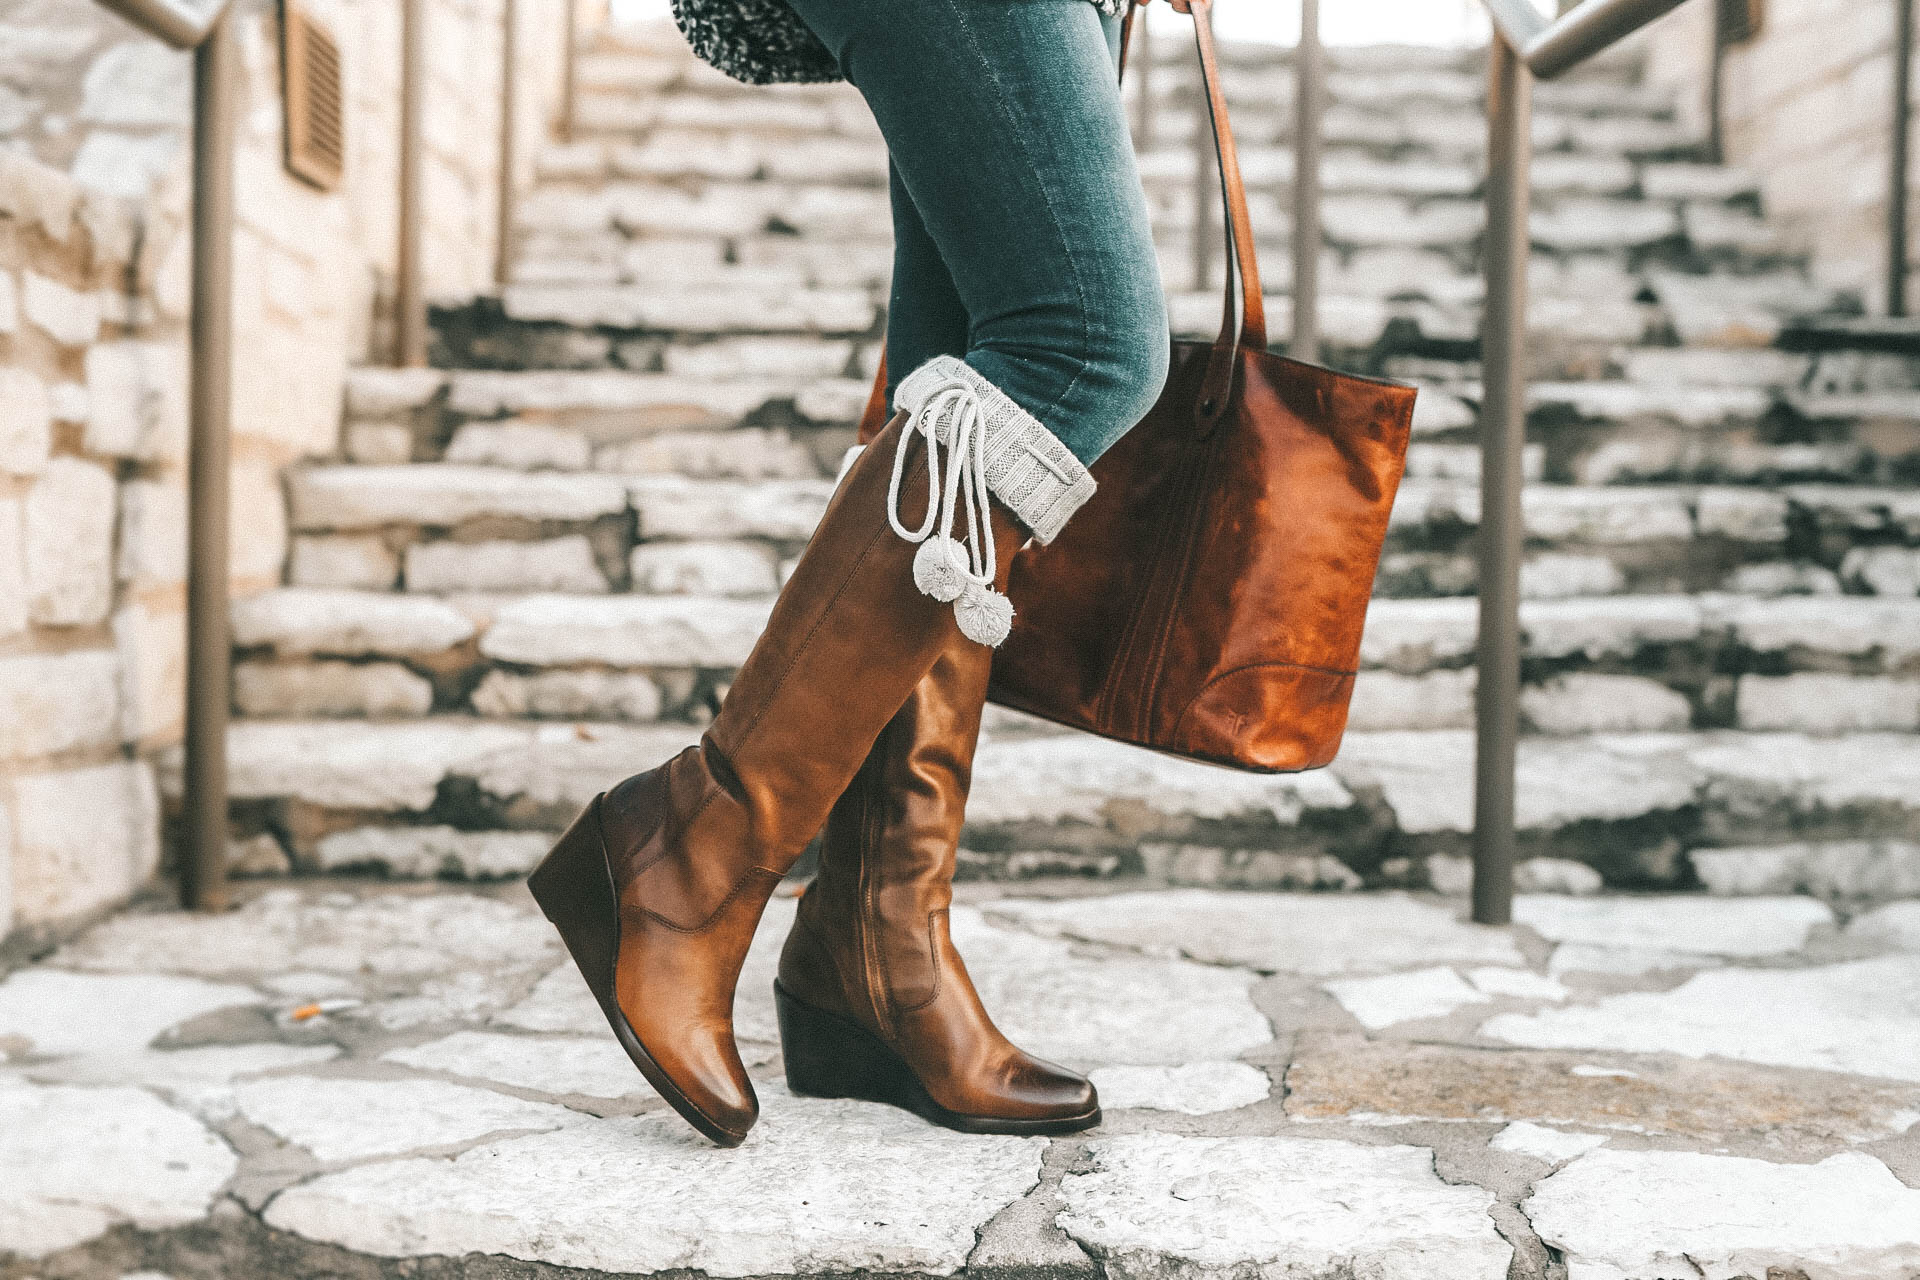 DTKAustin is sharing the best investment boots for Fall and Winter with Frye and Zappos. Ashley is wearing Knee high pom pom socks from UGG, skinny jeans from Levis, a chunky knit beanie from Sole Society, Melissa Frye Tote and a knit sweater from Nordstrom. || Dressed to Kill #winterboots #womensboots #fryeboots #dtkaustin